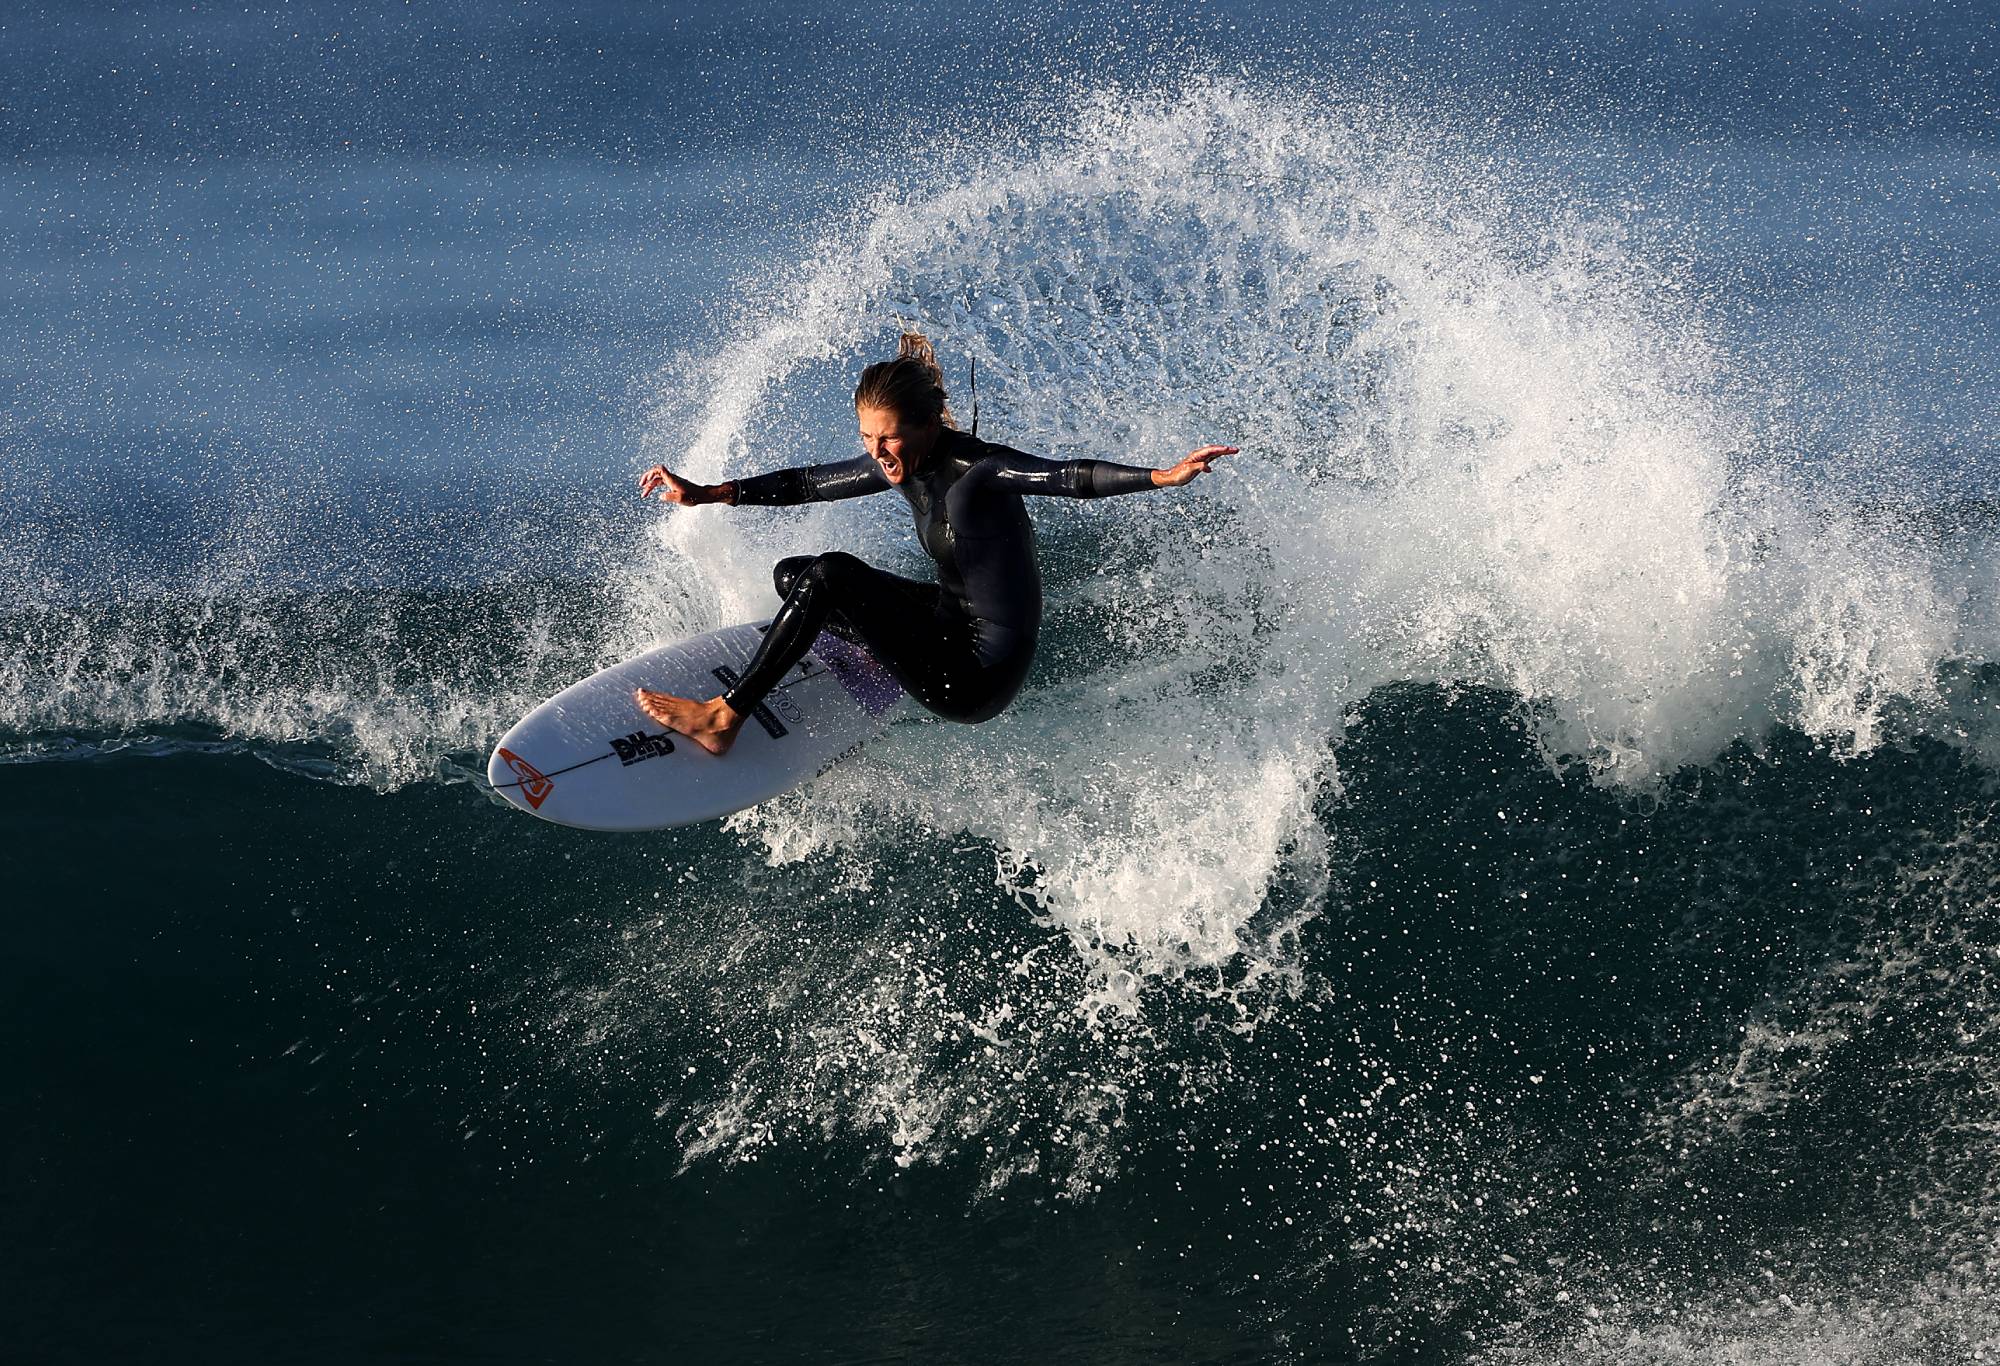  Stephanie Gilmore of Australia surfs during a training session at Lower Trestles ahead of the 2022 Rip Curl WSL Finals on September 06, 2022 in San Clemente, California. (Photo by Sean M. Haffey/Getty Images)